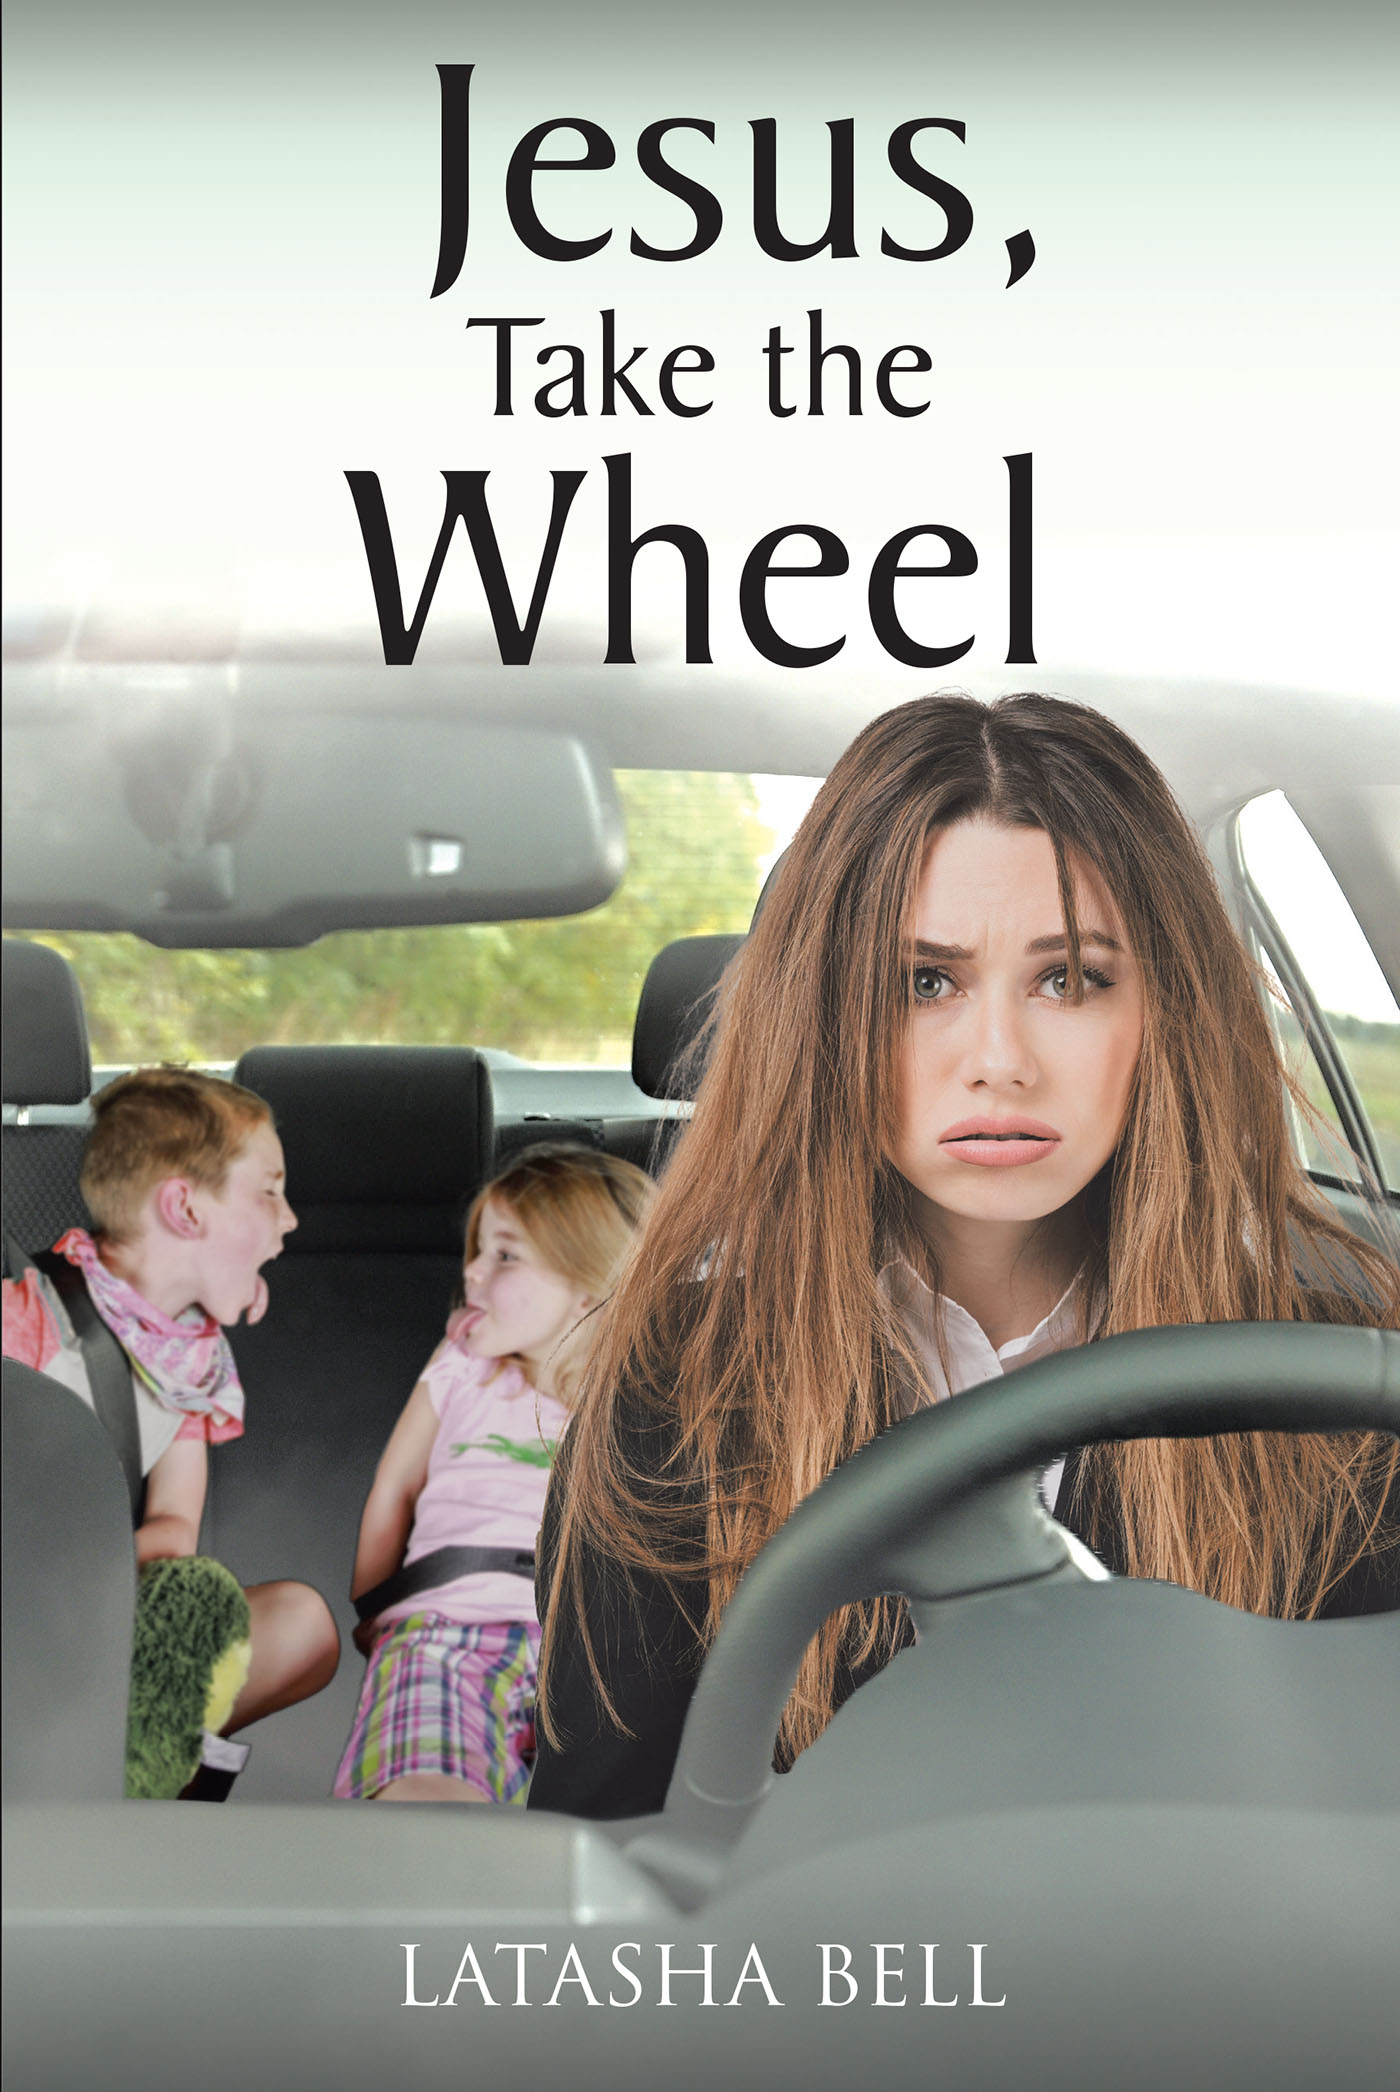 LaTasha Bell’s Newly Released “Jesus, Take the Wheel” is an Enjoyable Collection of Bite-Sized Devotions Perfect for the Busy Mom